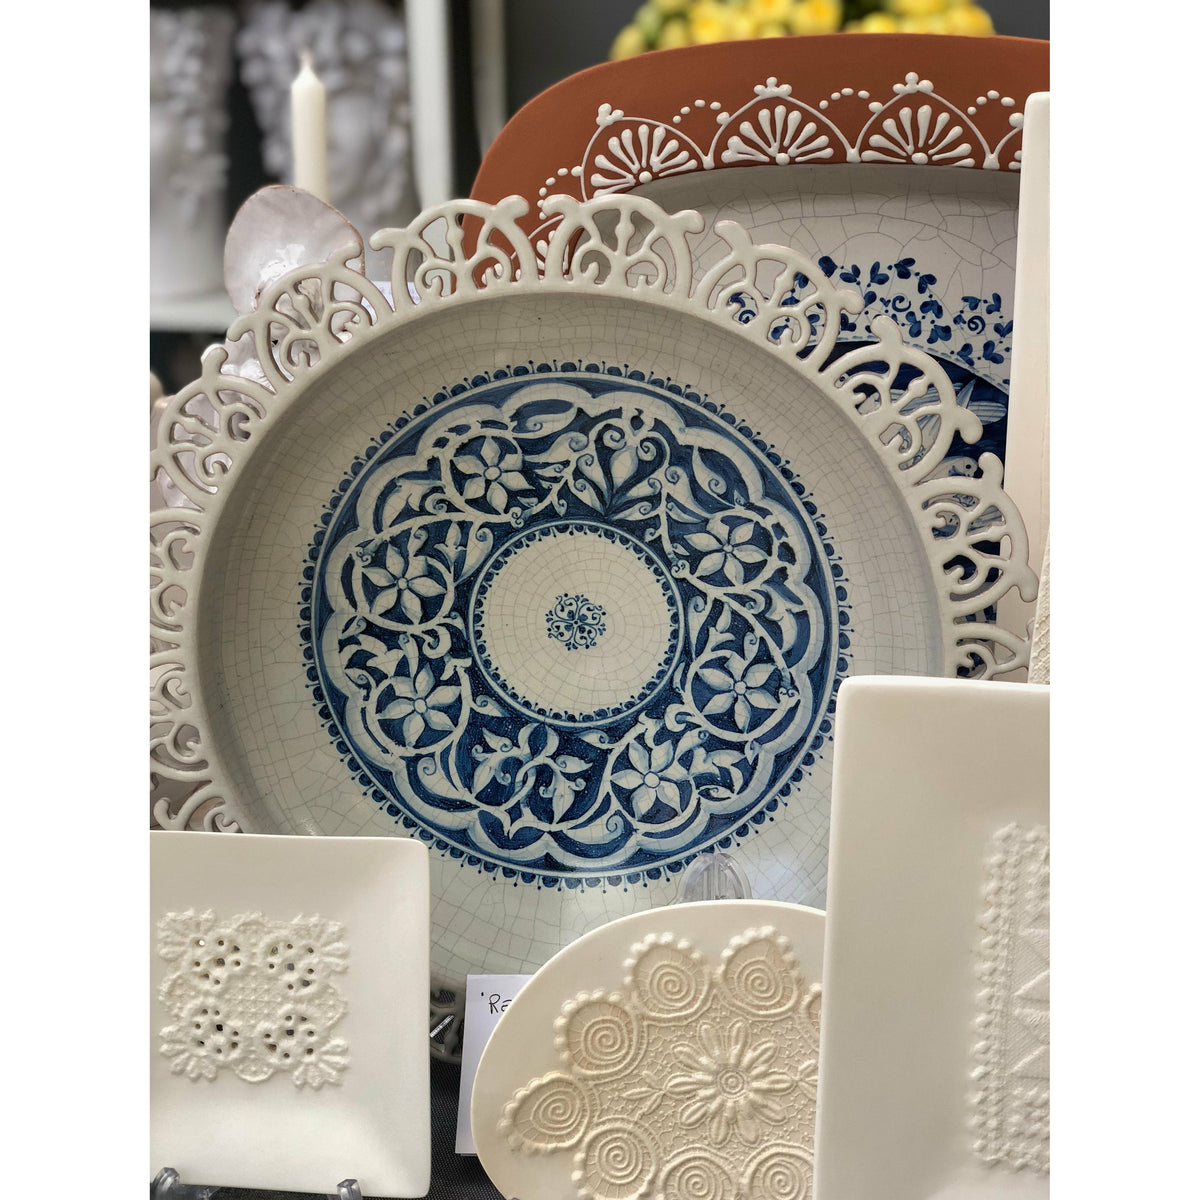 The White And Blue Lace Plate - AGATA TREASURES